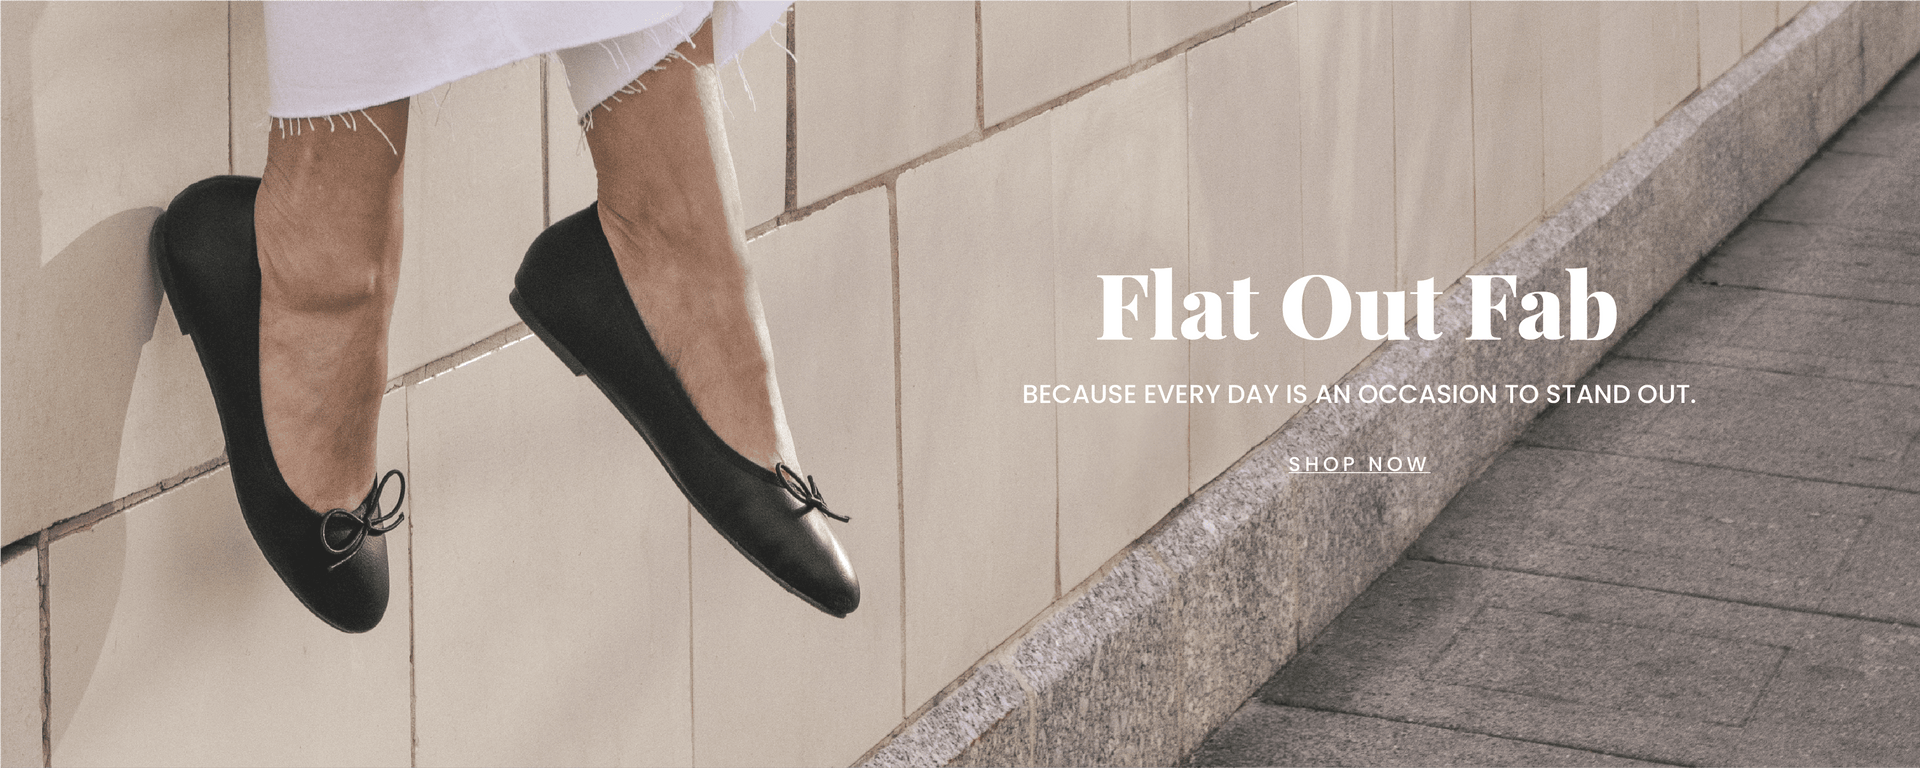 "Flat Out Fabulous" text in front of a background with a while building. A models legs are in view wearing a pair of classic black flats. "Shop Now" call to action links to the collection.